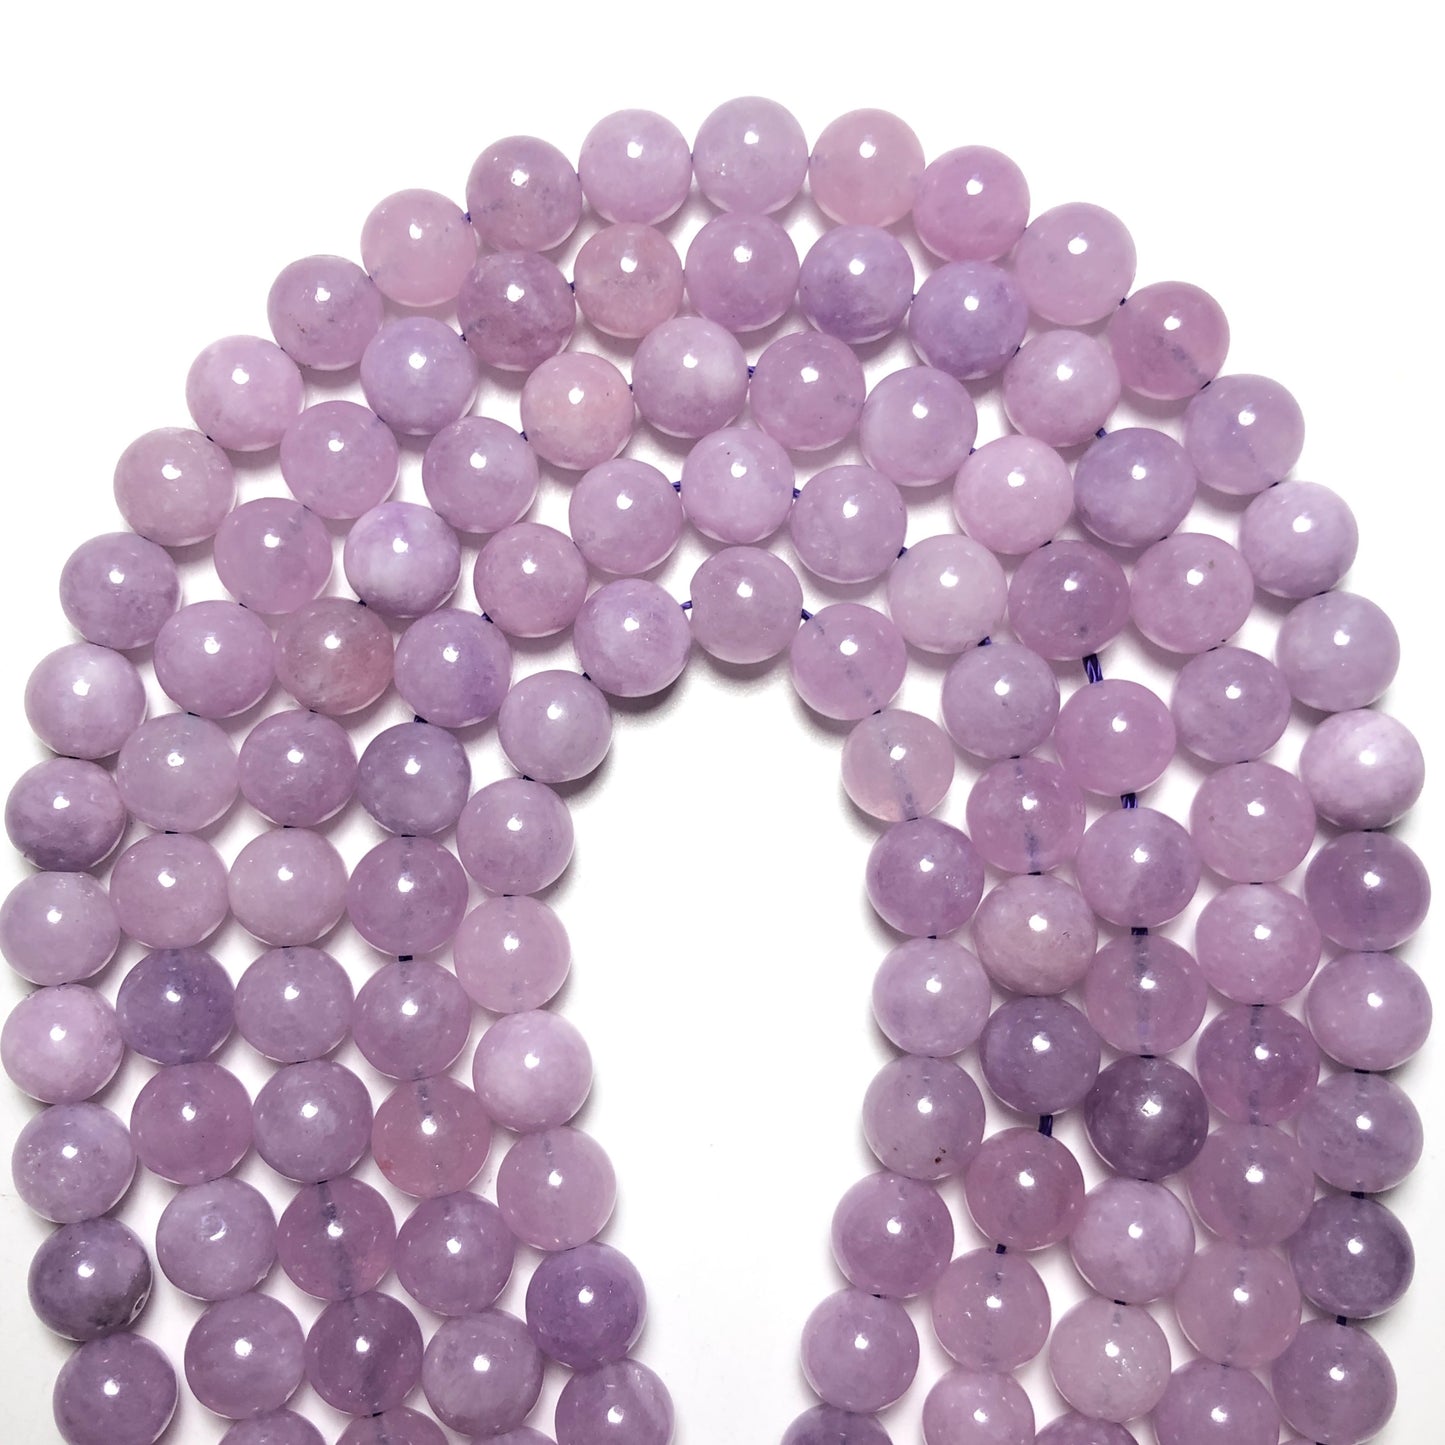 2 Strands/lot 10mm Multicolor Quartz Round Stone Beads Light Purple Quartz Stone Beads New Beads Arrivals Other Stone Beads Charms Beads Beyond